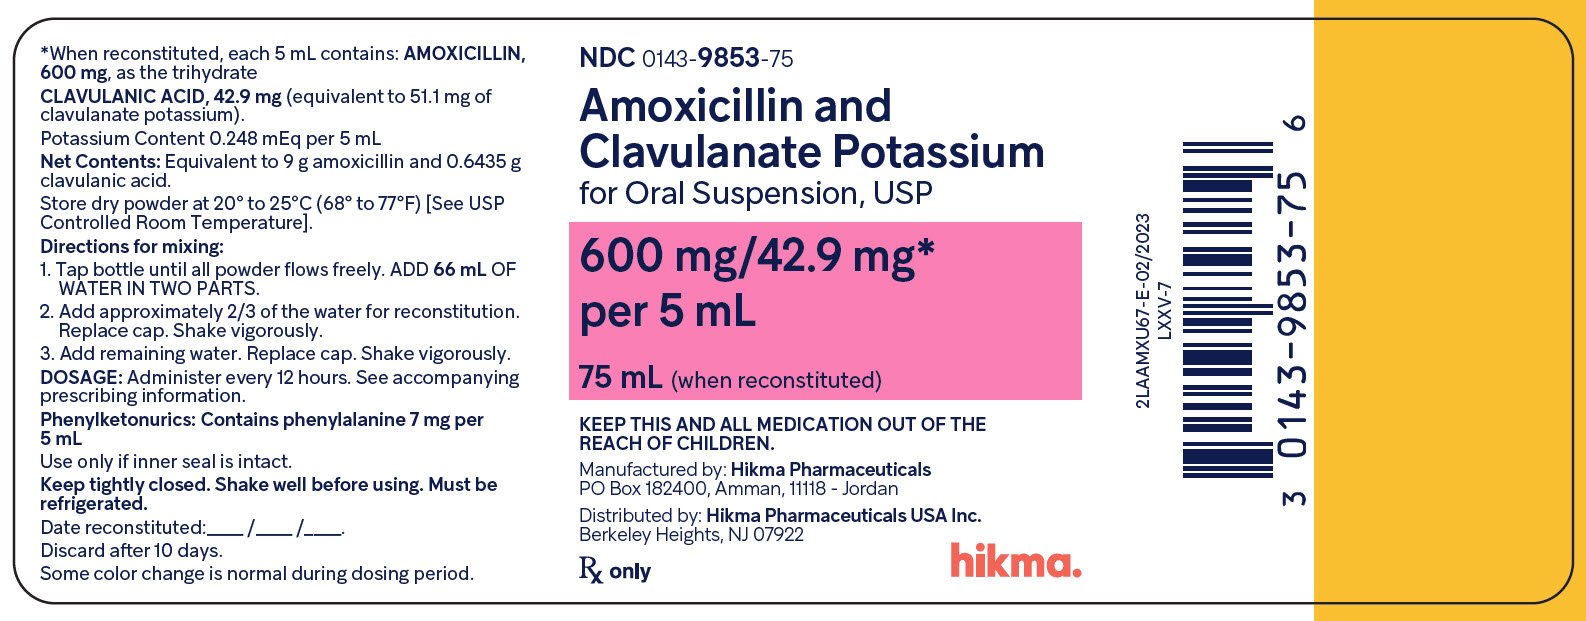 Amoxicillin and Clavulanate Potassium for Oral Suspension USP, 600 mg/42.9 mg per 5 mL (75 mL) bottle label image